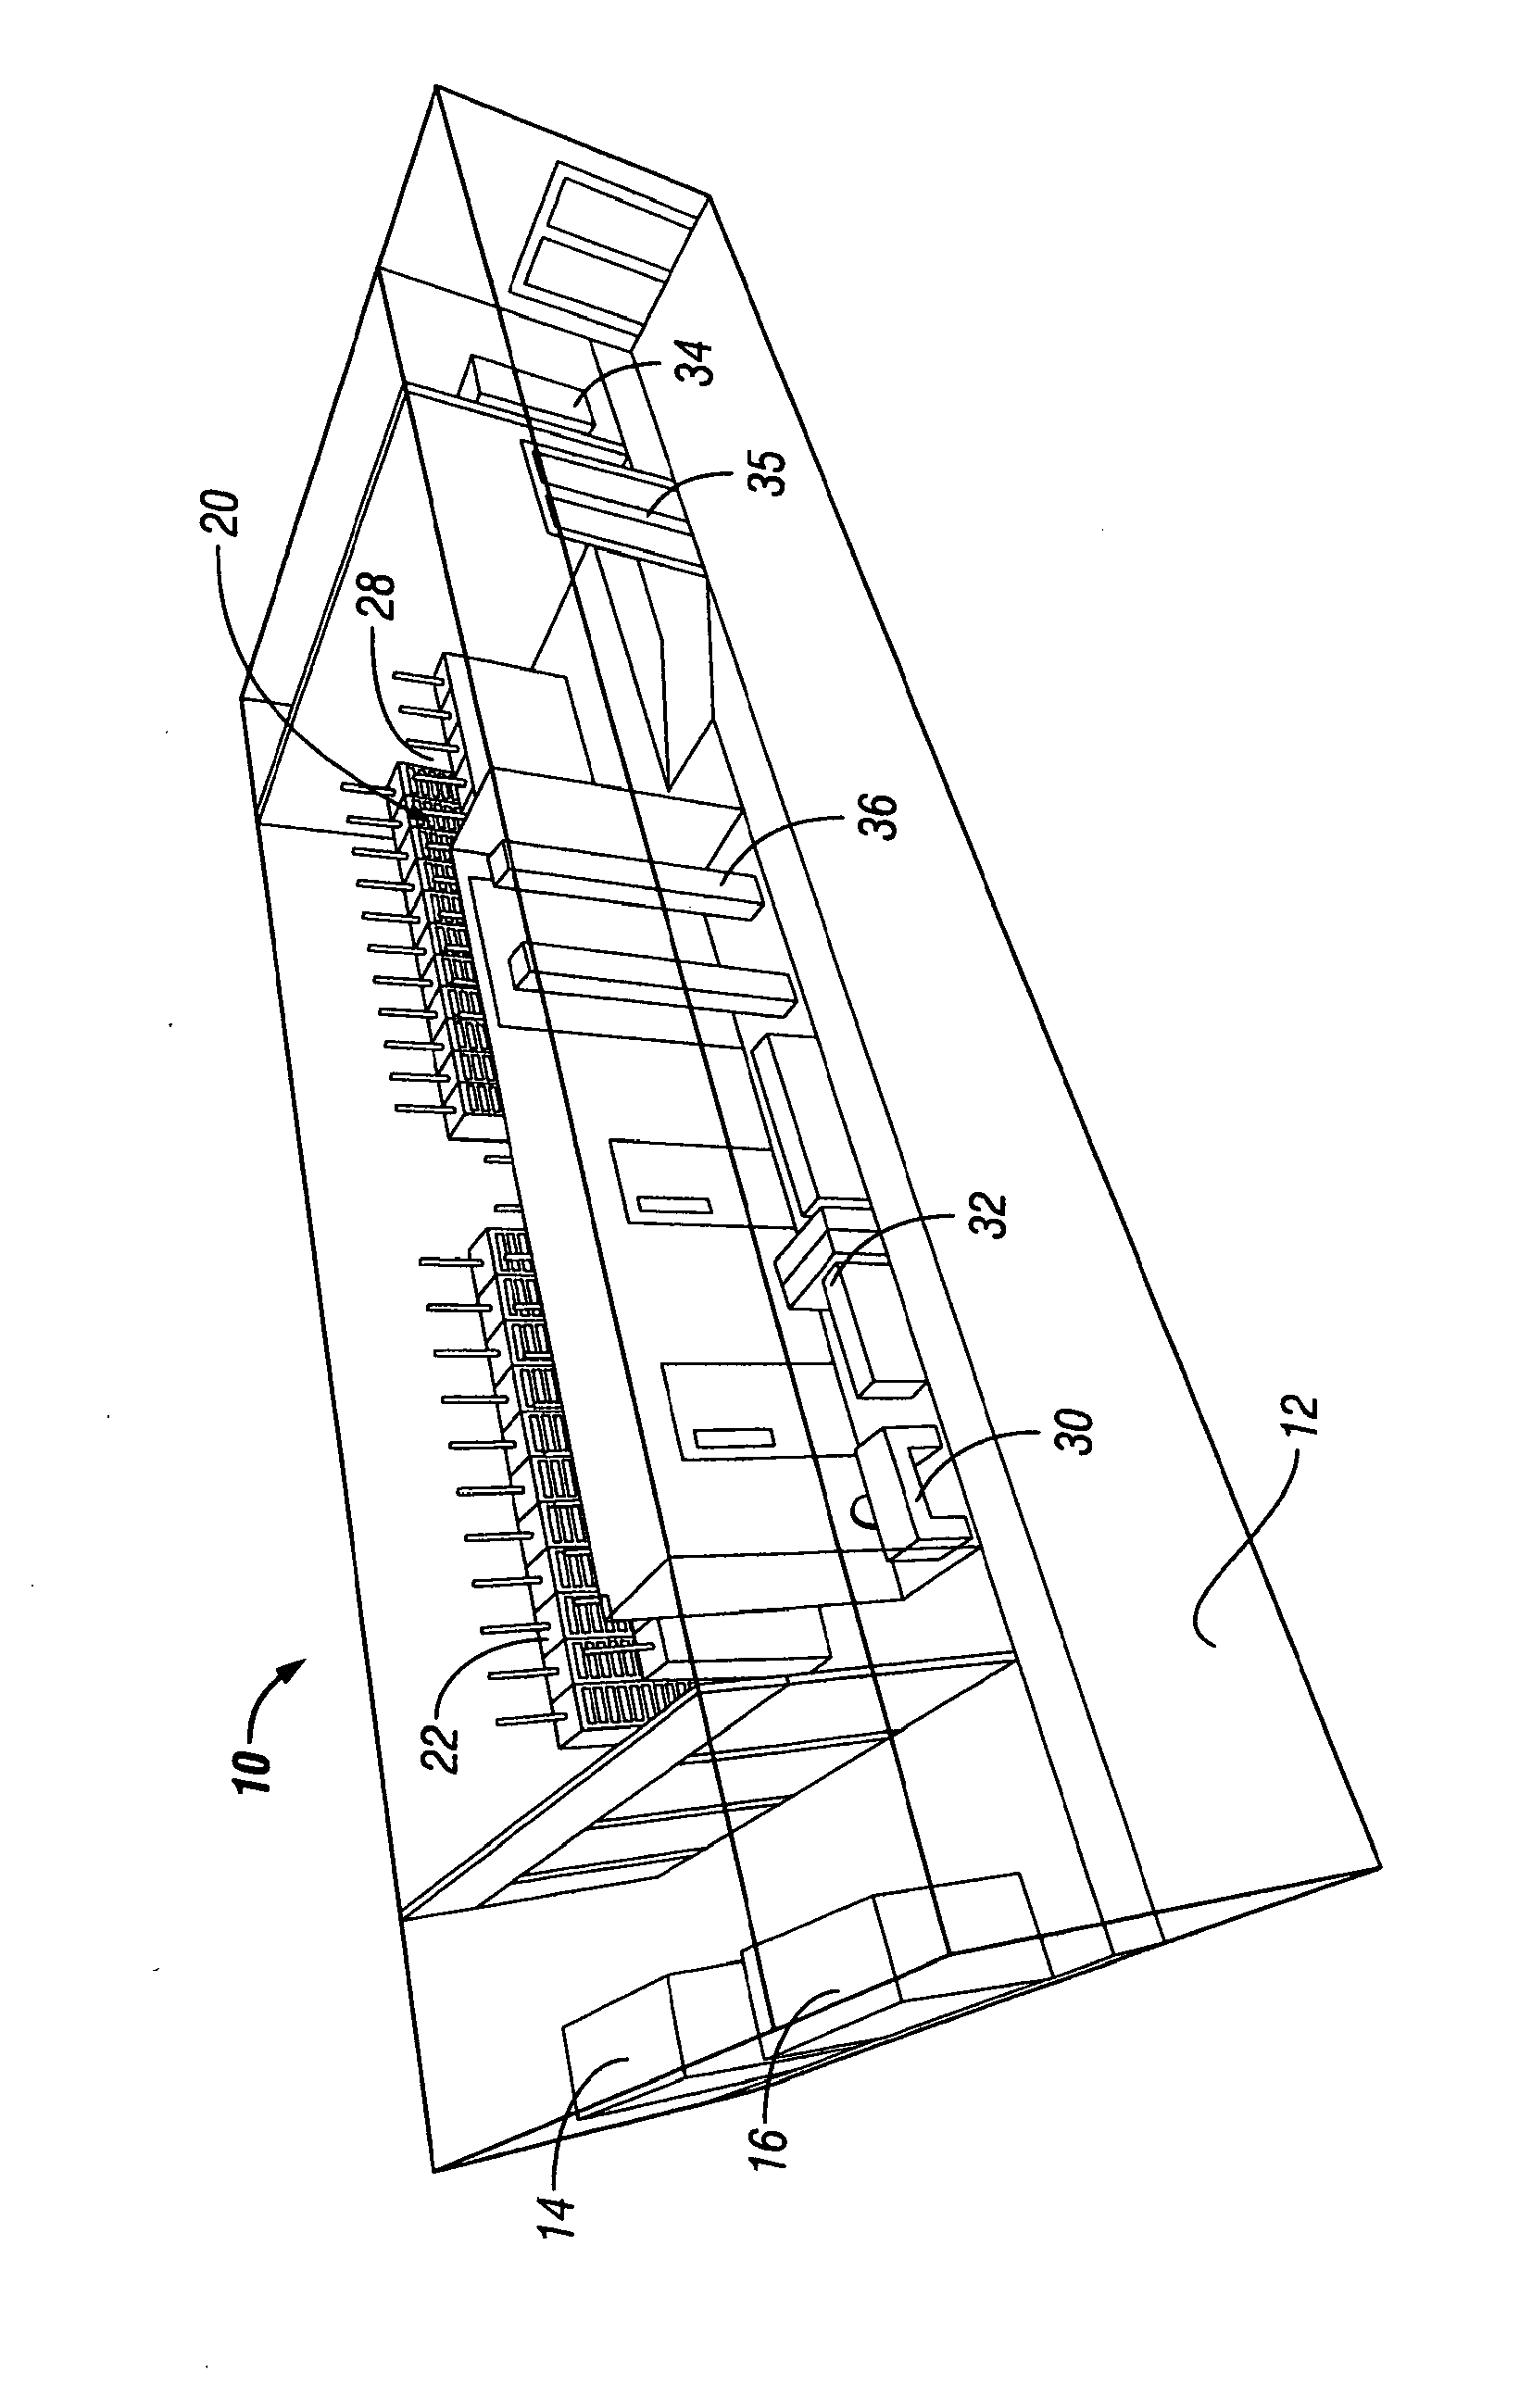 Method for Offering Lower Rent And Improved Service To Tenants In A Multi-Tenant Building that are Sharing a Data Center in the Multi-Tenant Building